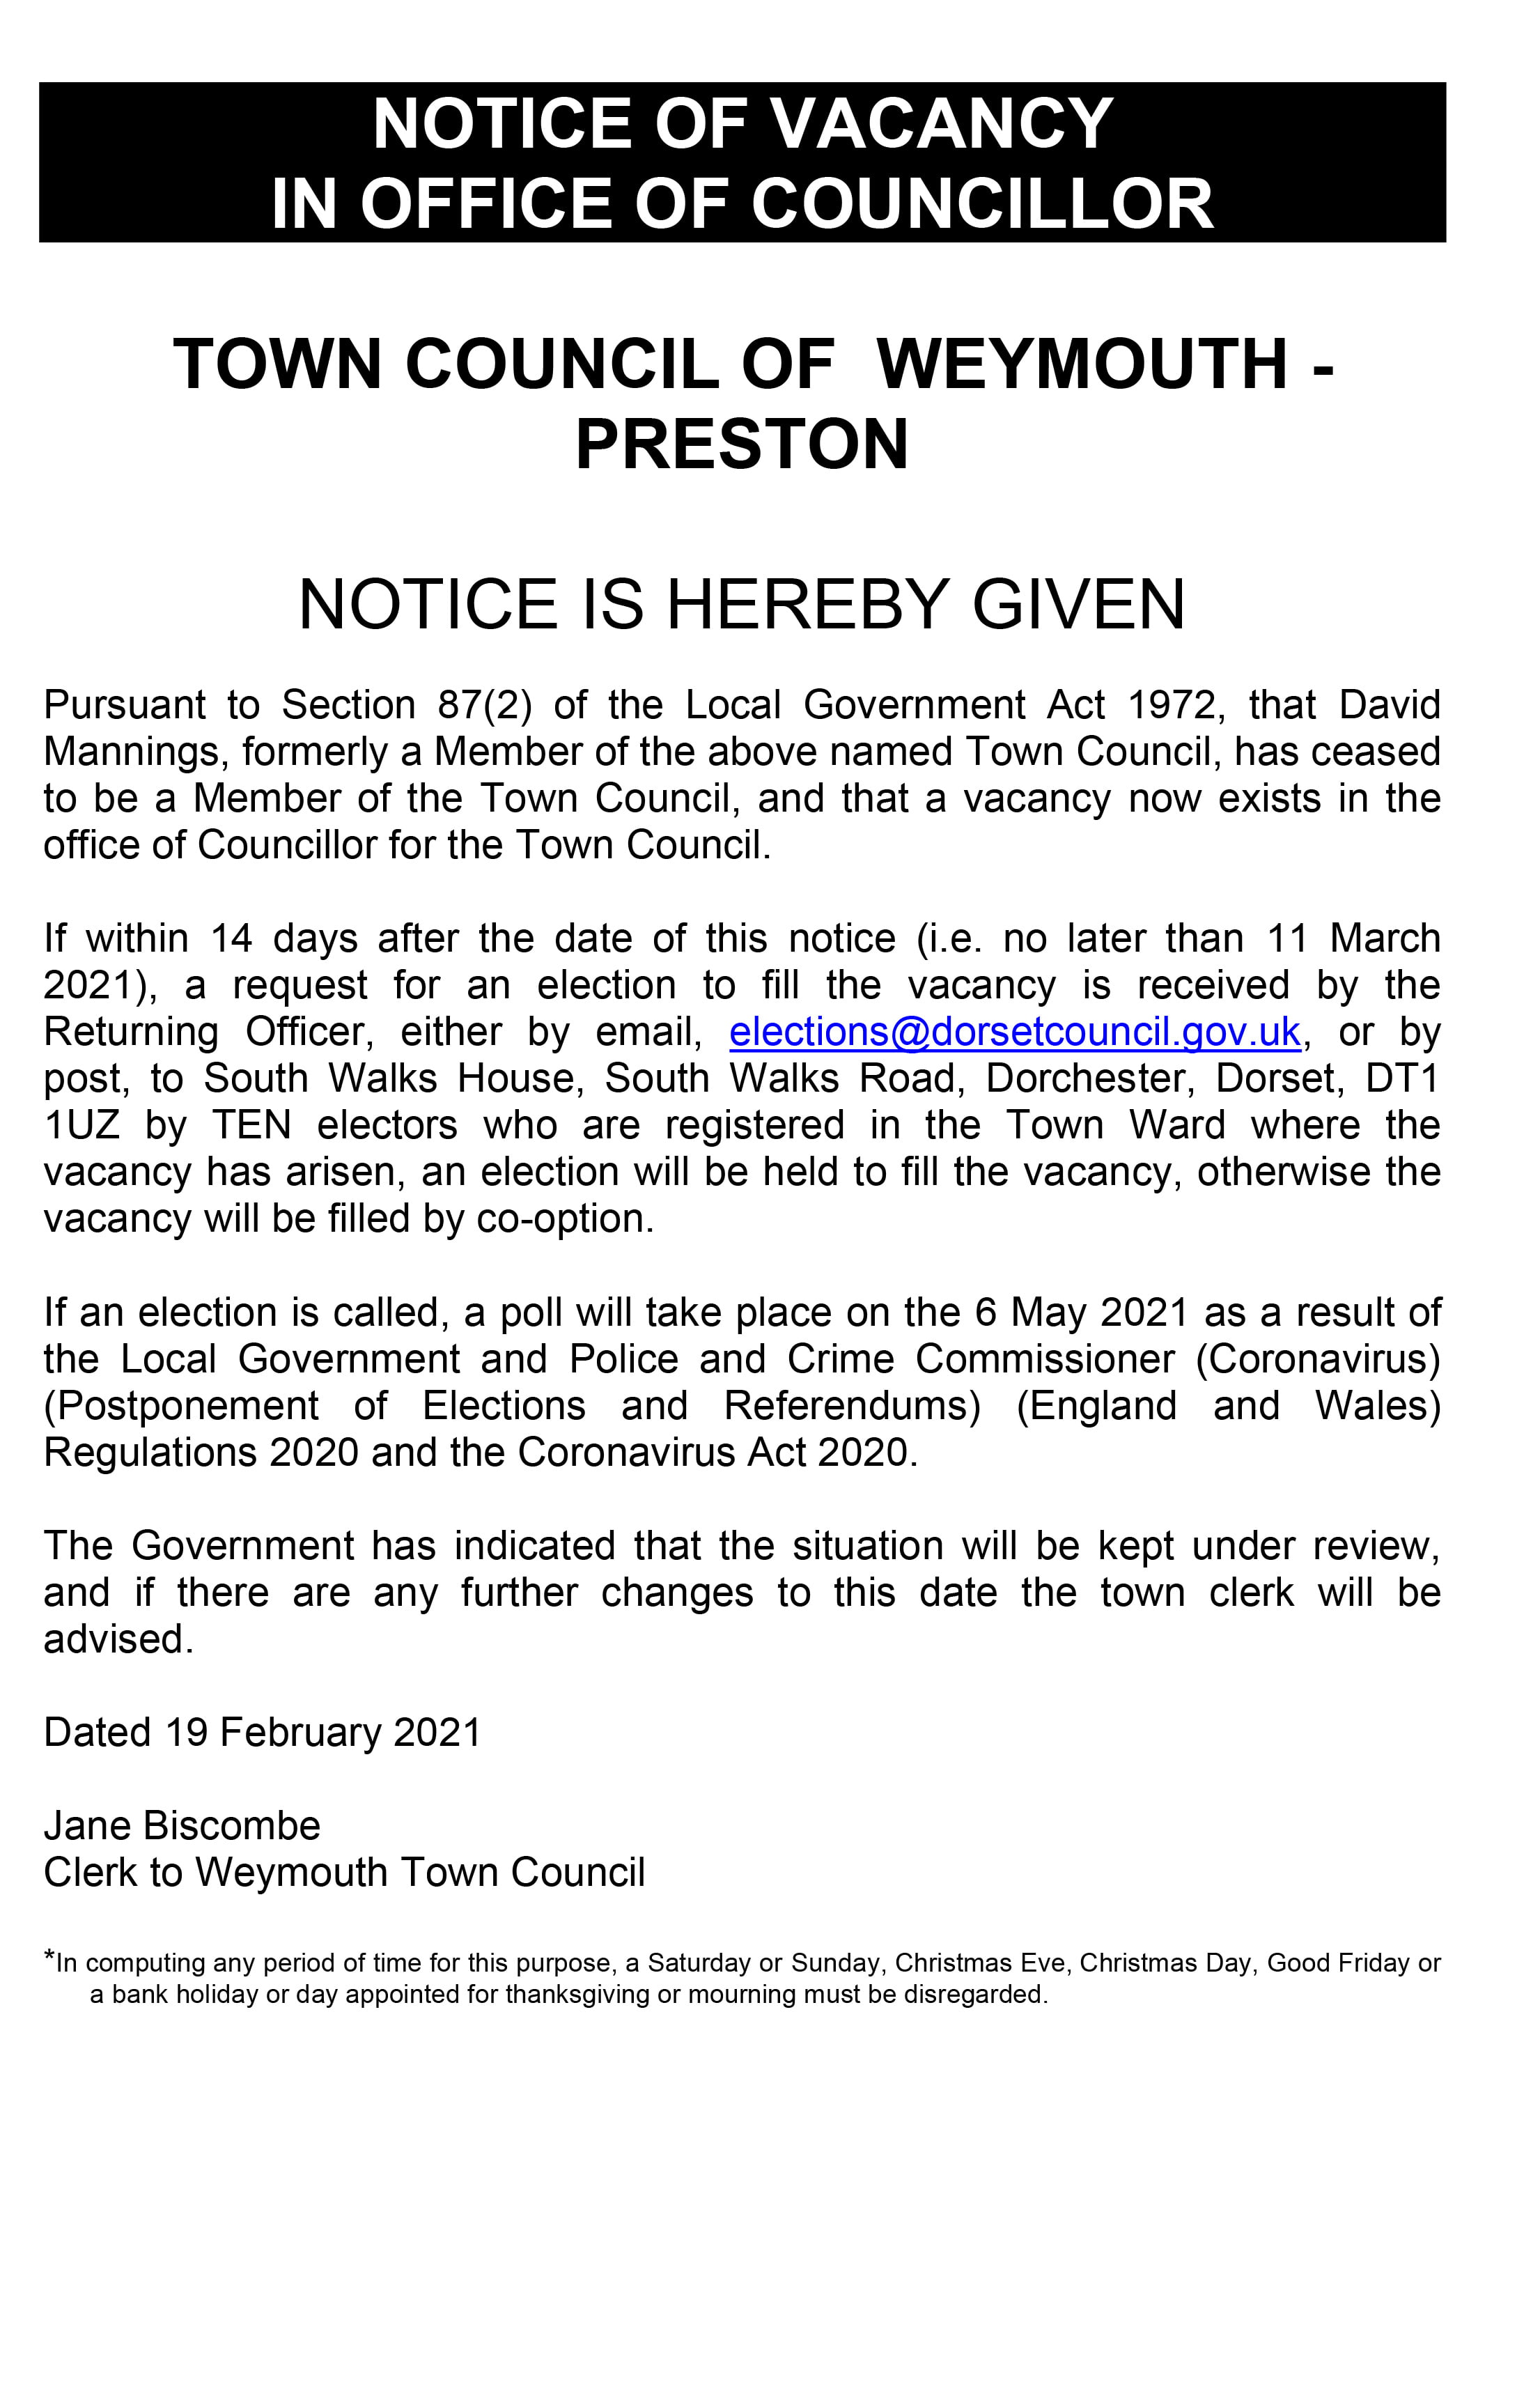 Notice of vacancy in office of Councillor